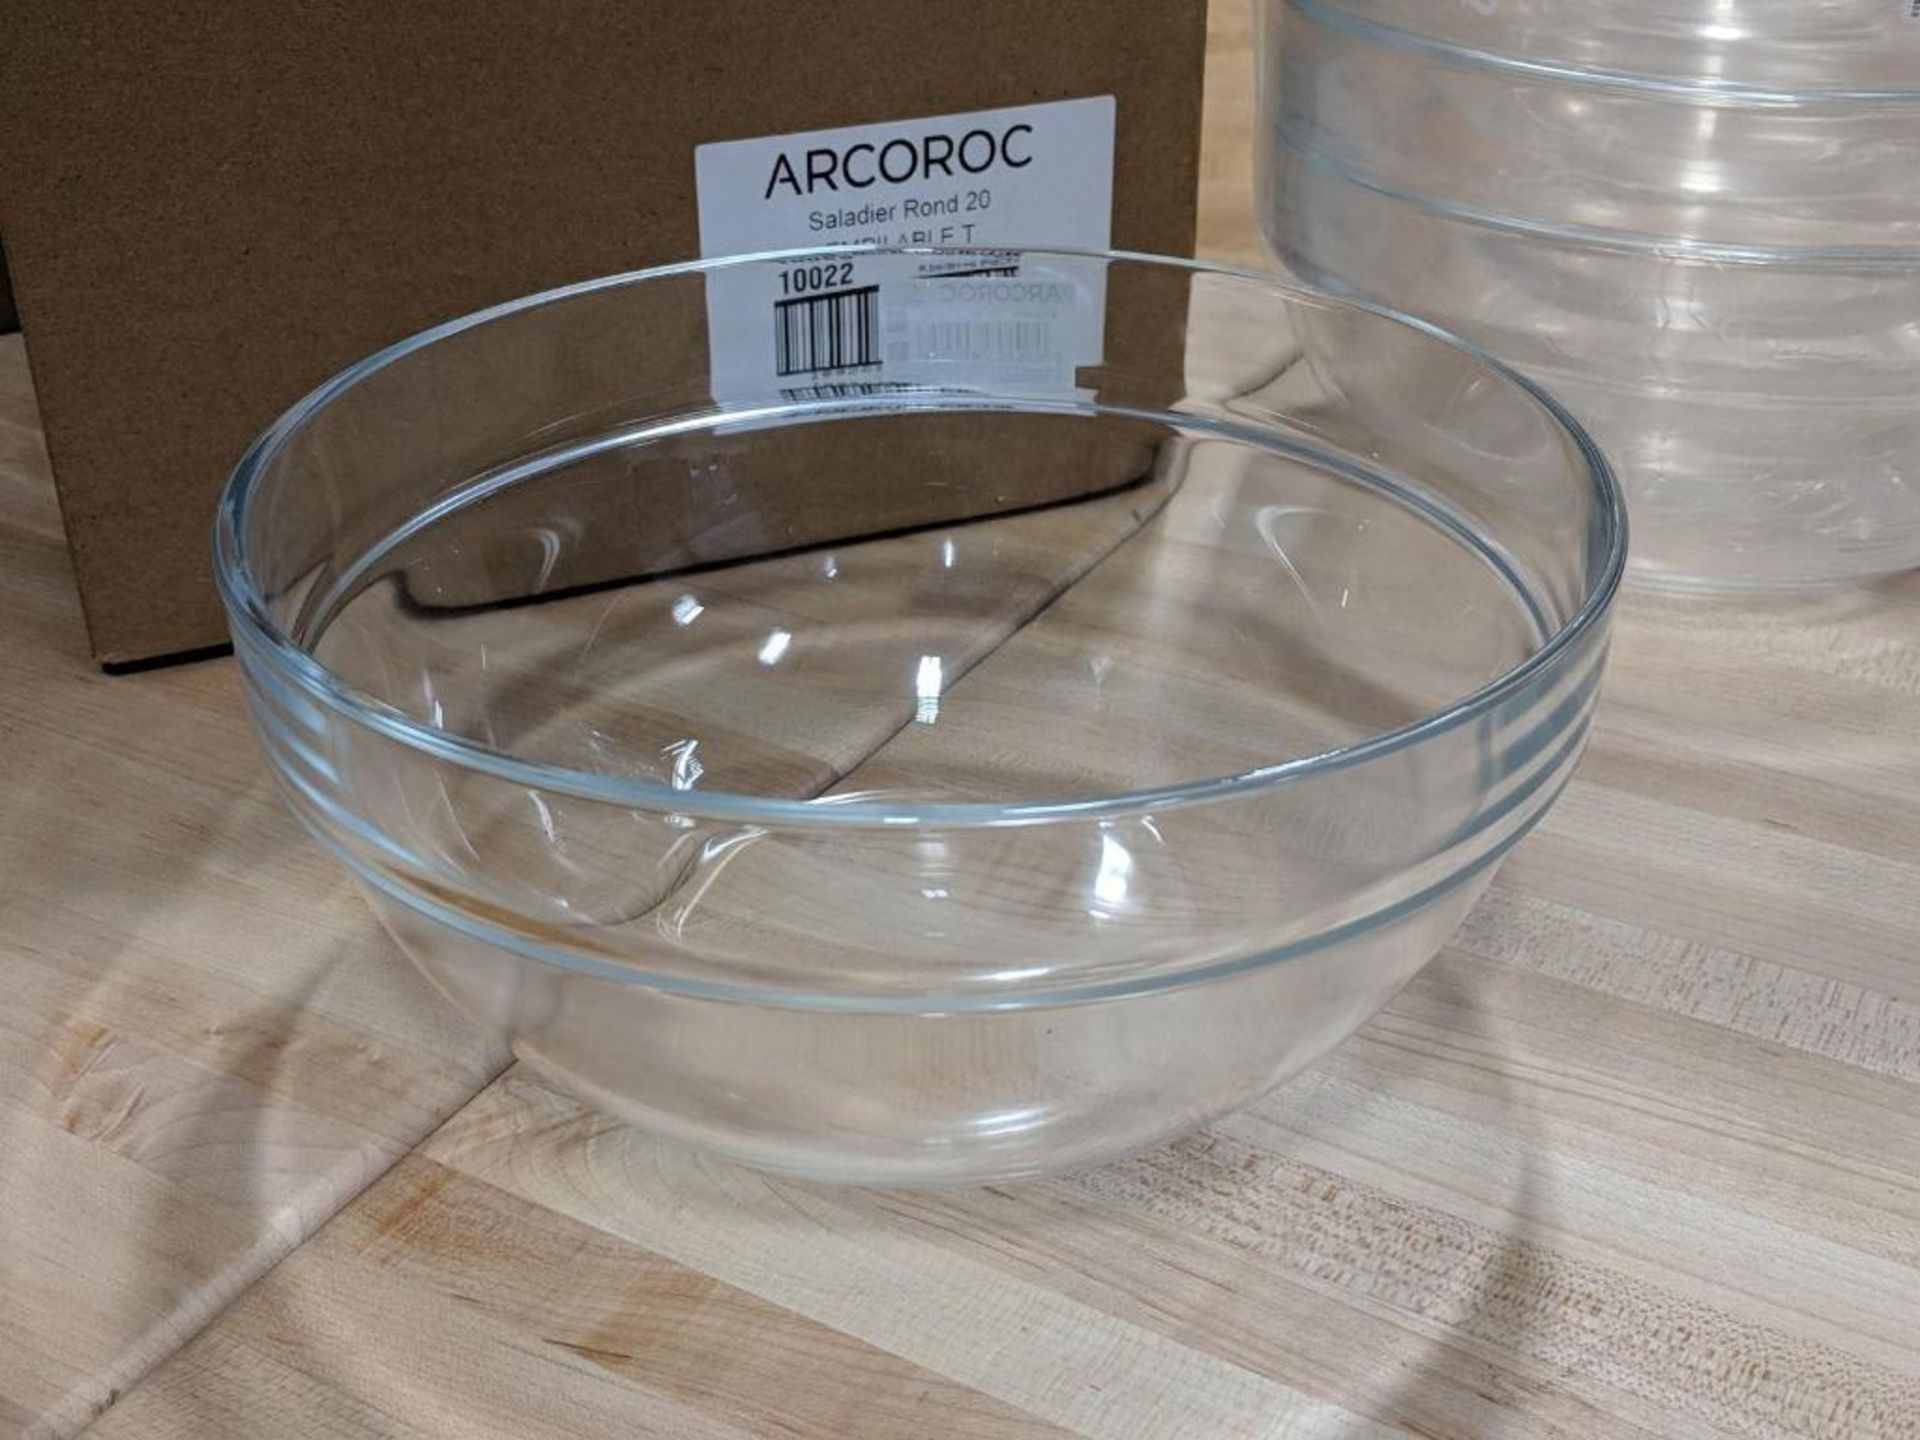 ARCOROC 8" CLEAR GLASS STACKING SALAD BOWLS, 64OZ/1.9L - CASE OF 6 - NEW - Image 2 of 2